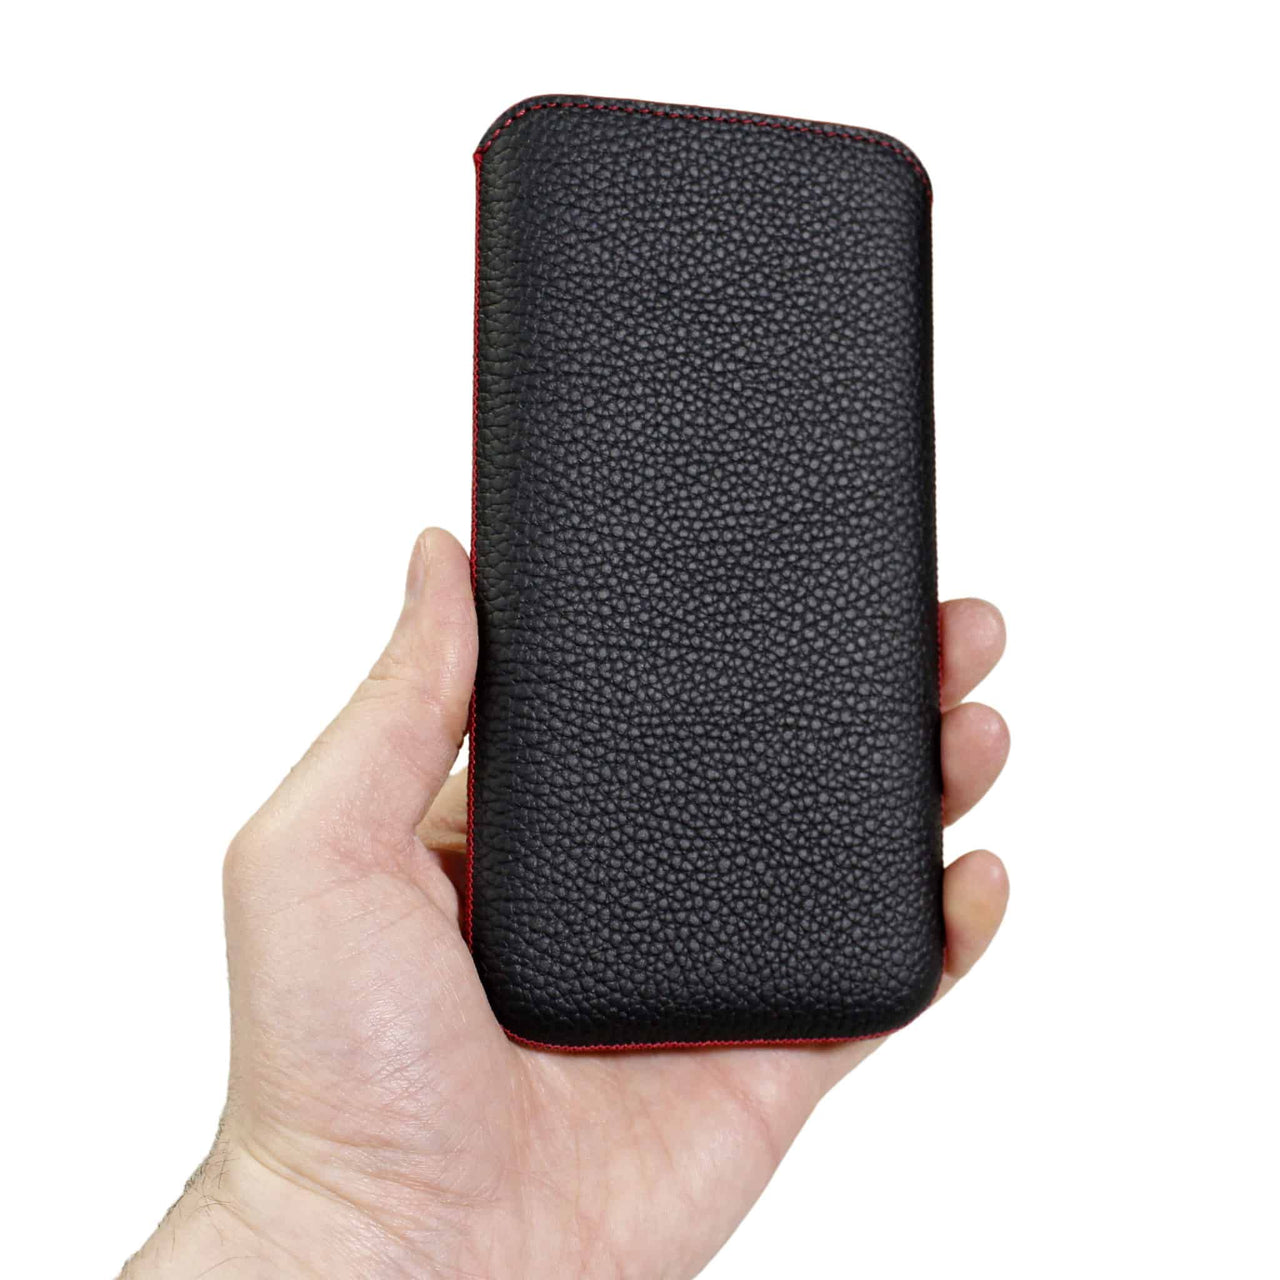 Nothing Phone 1 Genuine Leather Pouch Sleeve Case | Artisanpouch